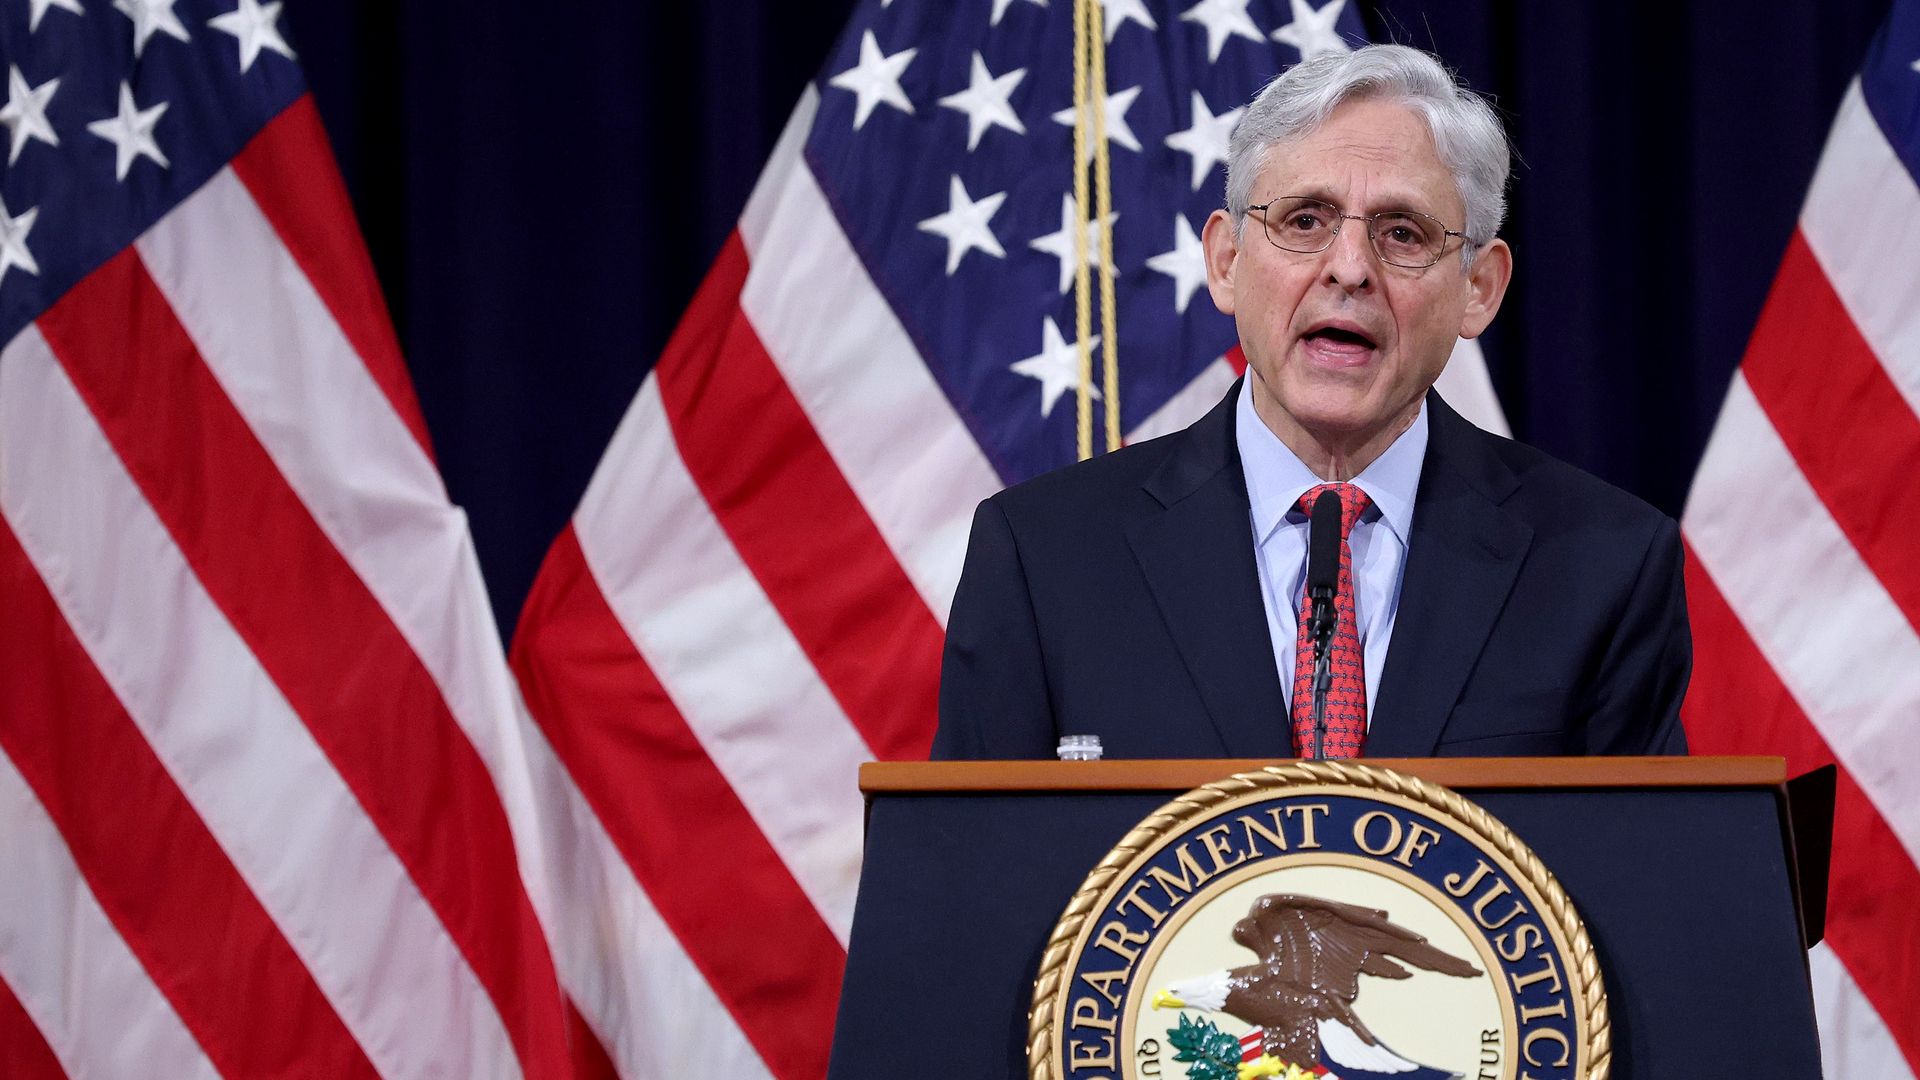 Photo of Merrick Garland speaking from a podium with the DOJ seal on it